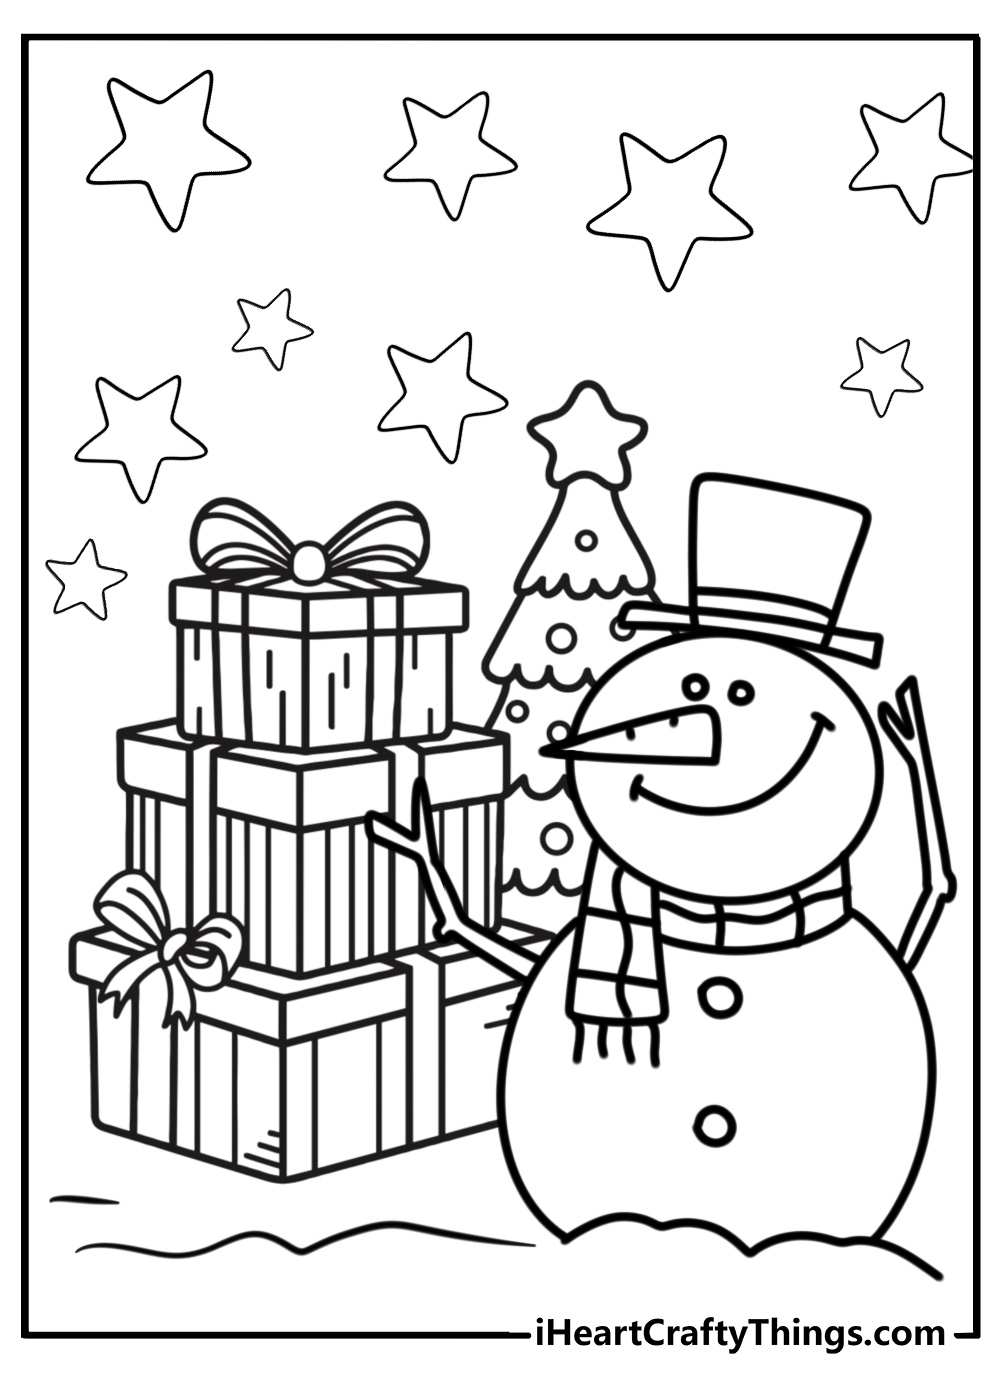 Snowman coloring pages for christmas